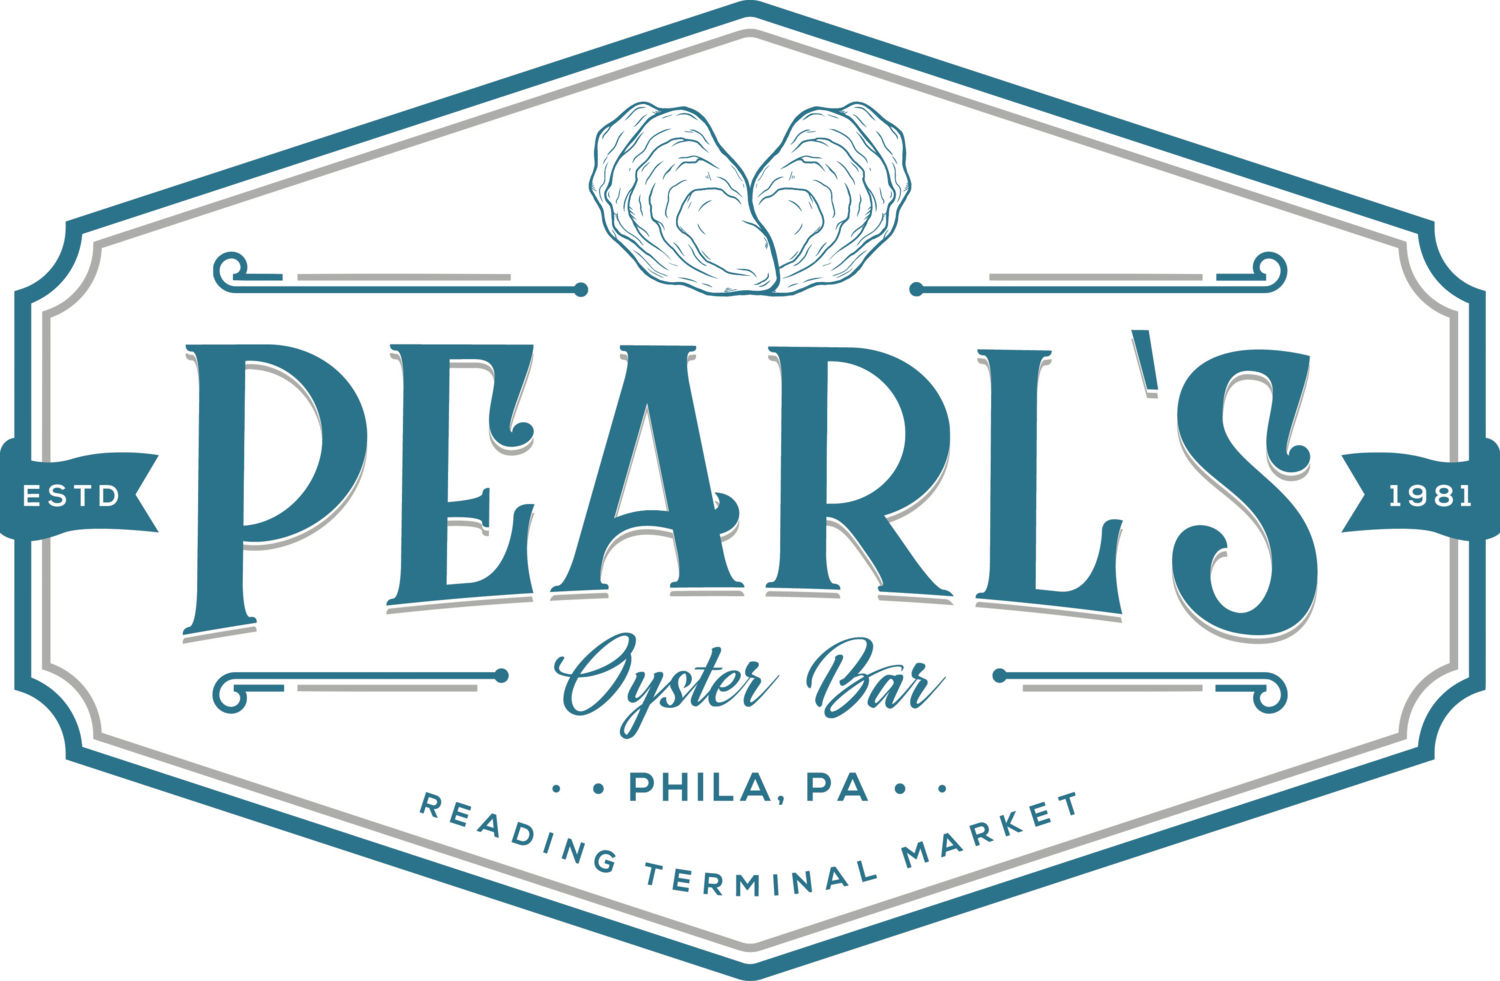 Pearl’s Oyster Bar